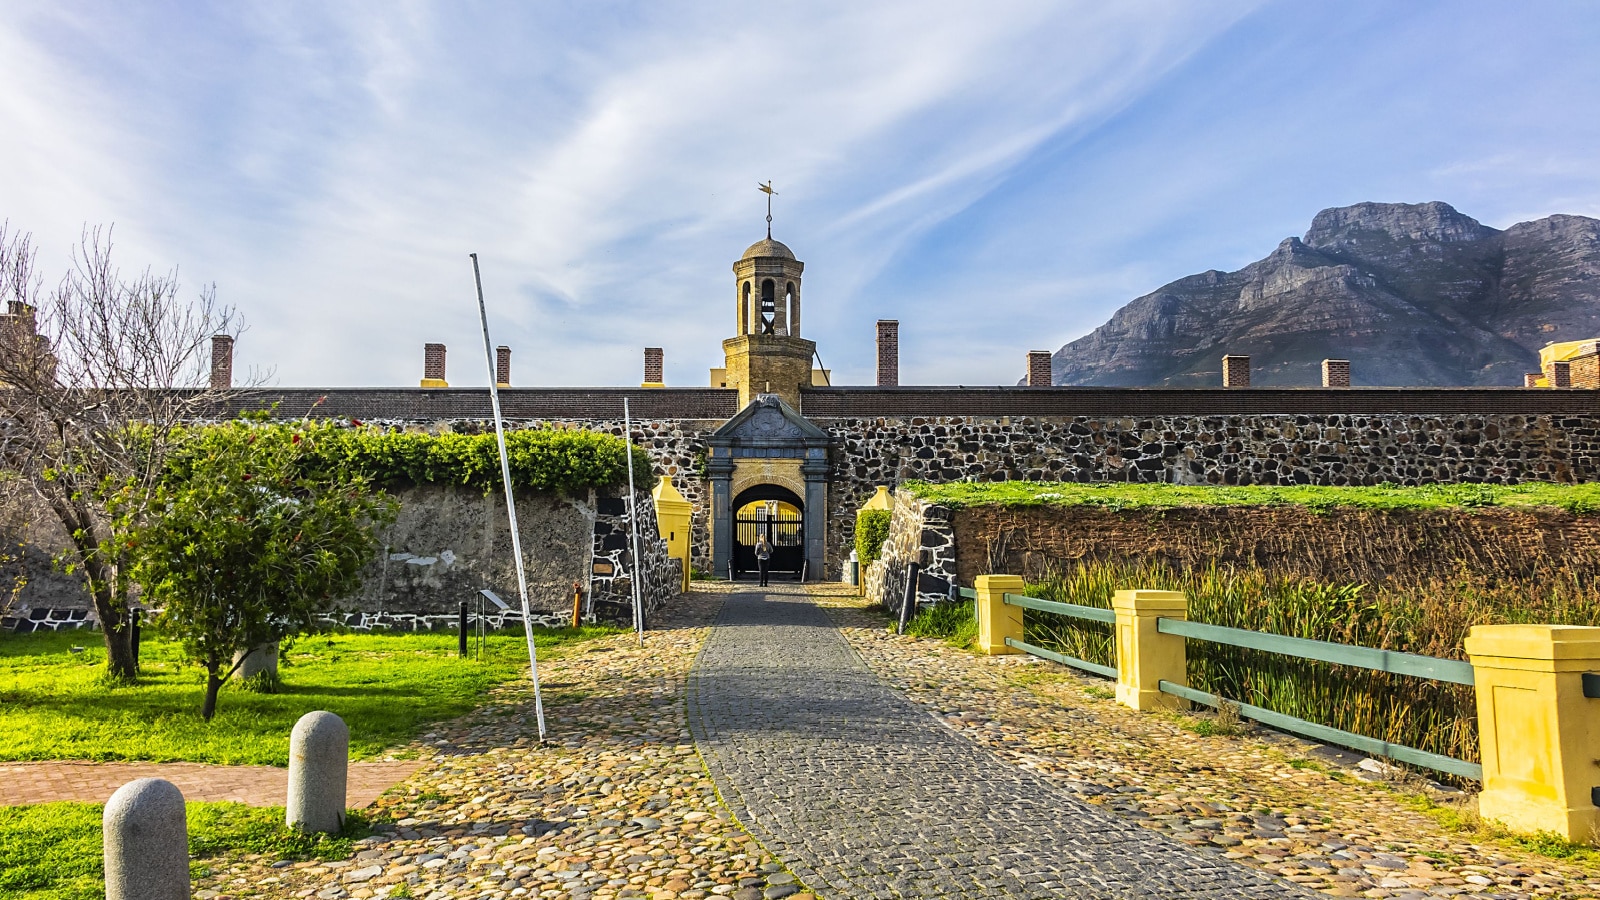 Entrance to the Castle of Good Hope or Cape Town Castle (Kasteel die Goeie Hoop) - bastion fort built in the XVII century in Cape Town. Cape Town, Western Cape, South Africa.